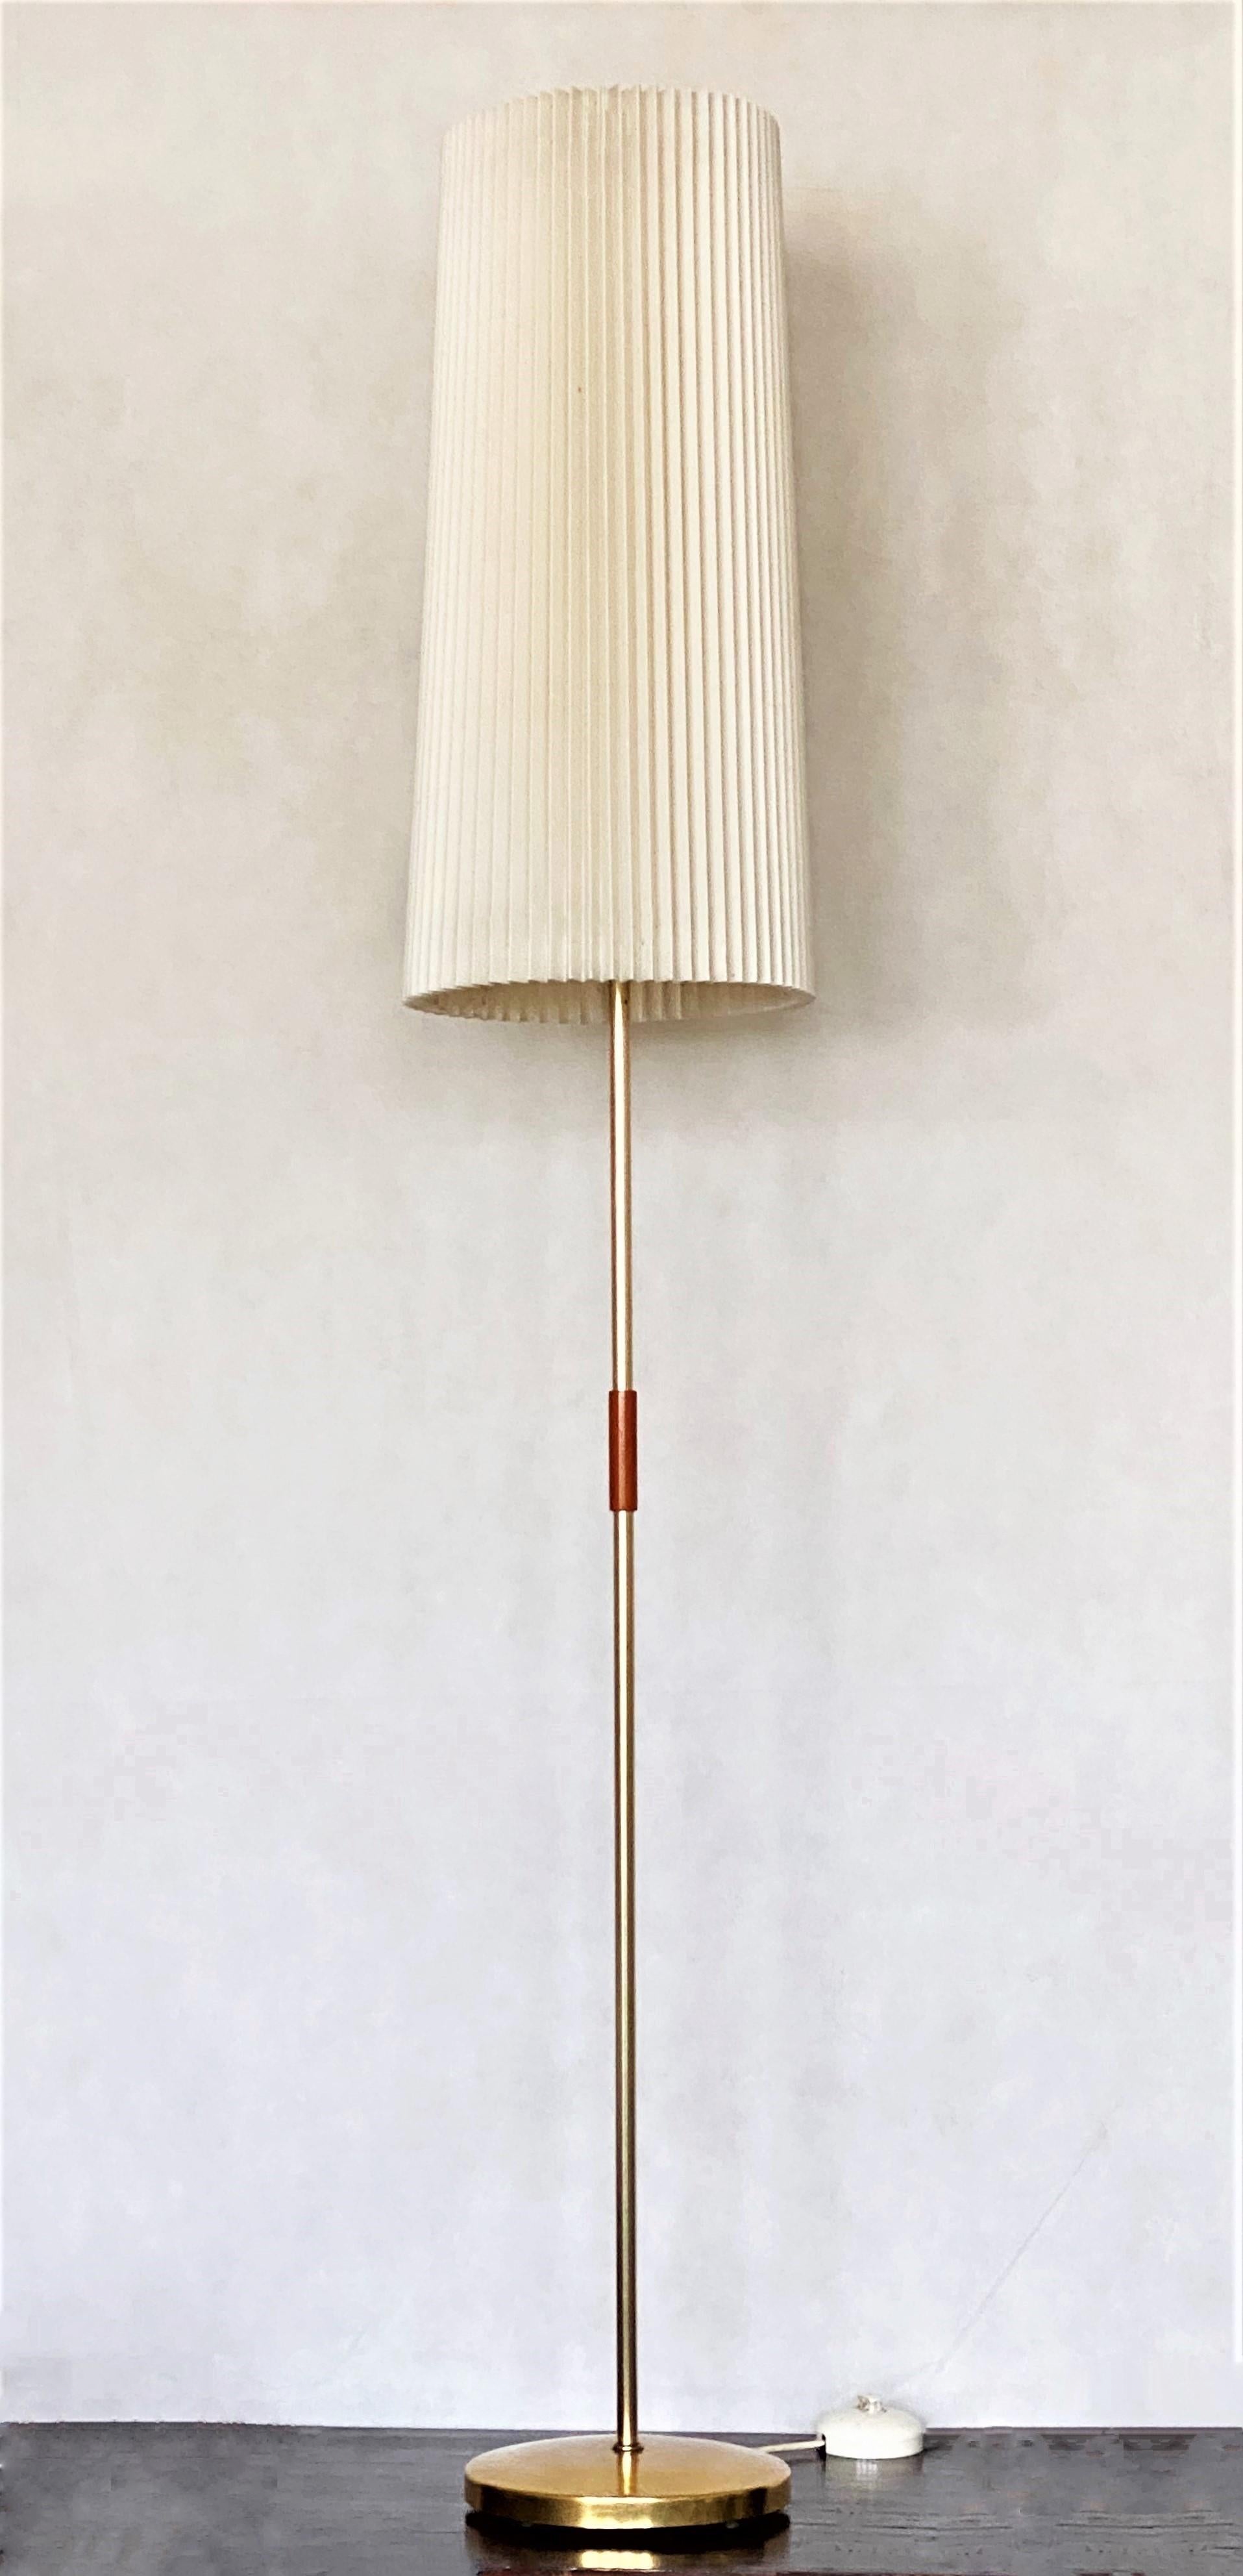 A very elegant vintage brass floor lamp, Italy, 1955-1959. Special model with a tall plastic pleated lampshade providing a warm, pleasant light. The lamp-shade is original and is in very good condition. It takes one E27 large sized light bulb. 
The